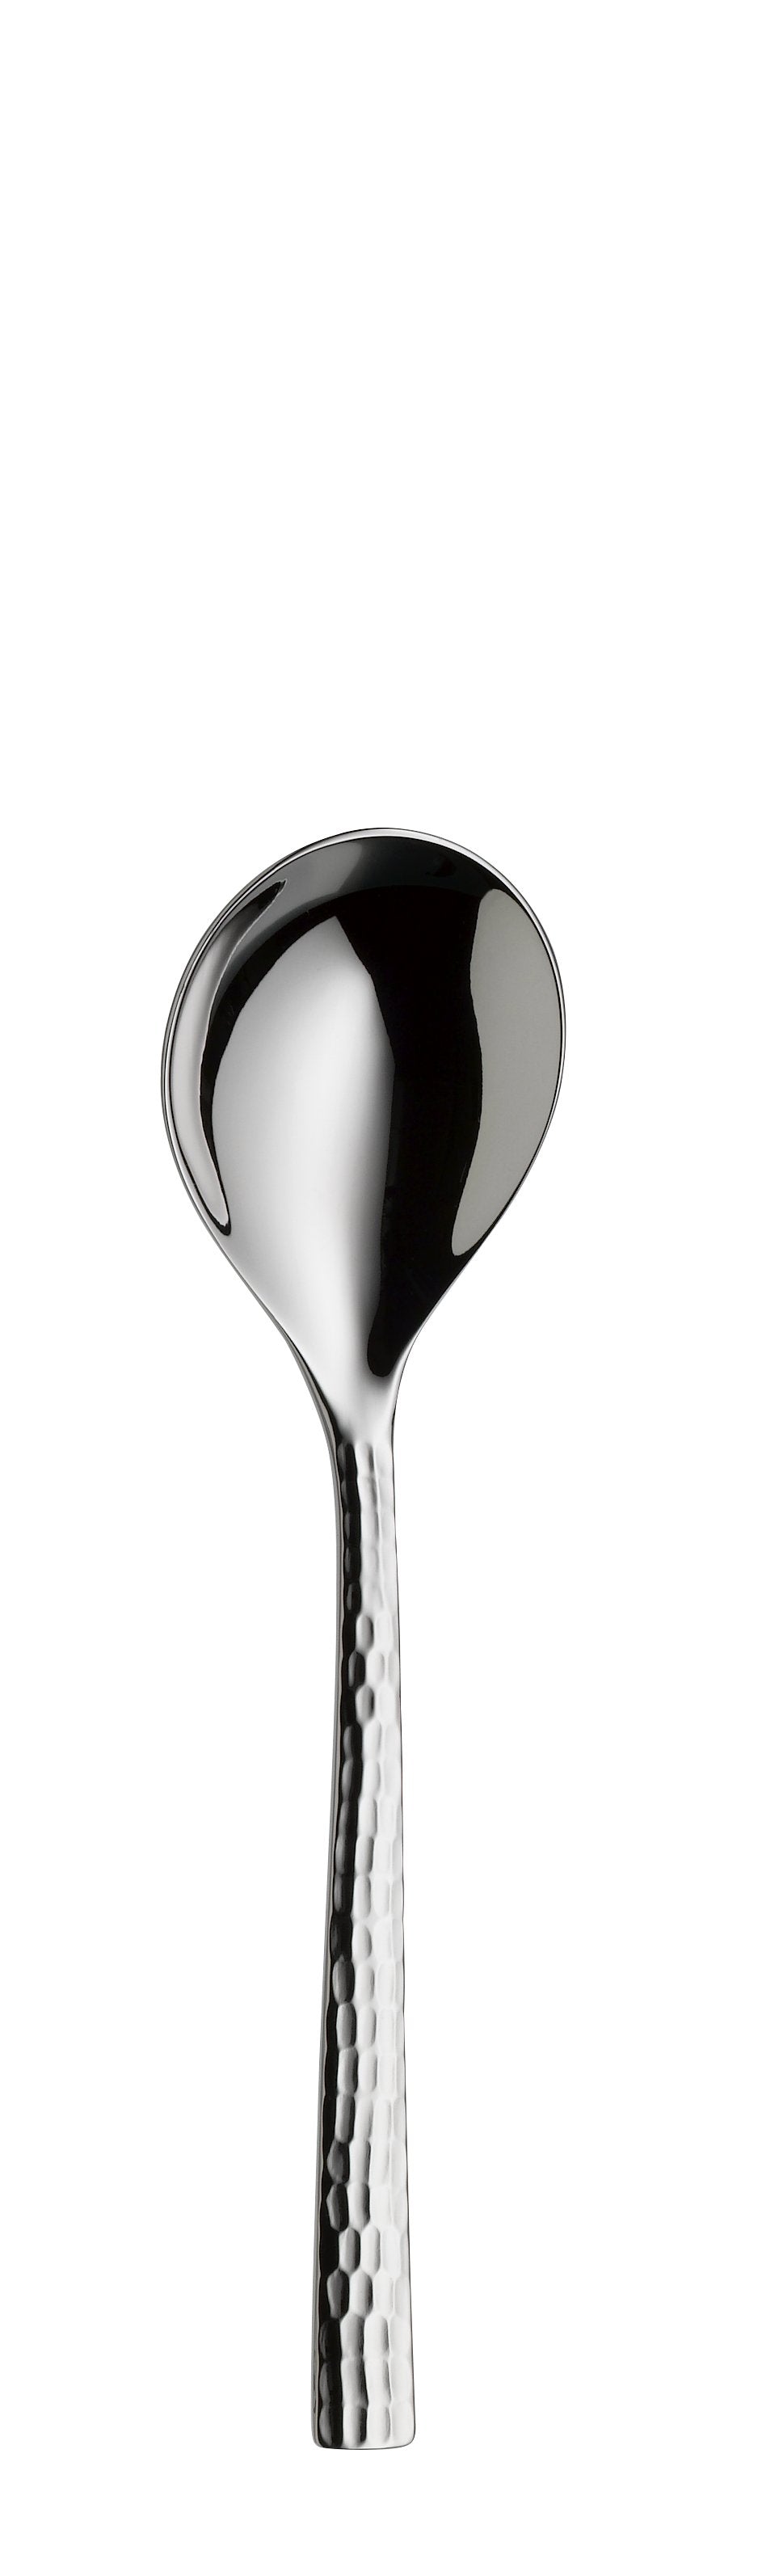 Round bowl soup spoon LENISTA silverplated 170mm